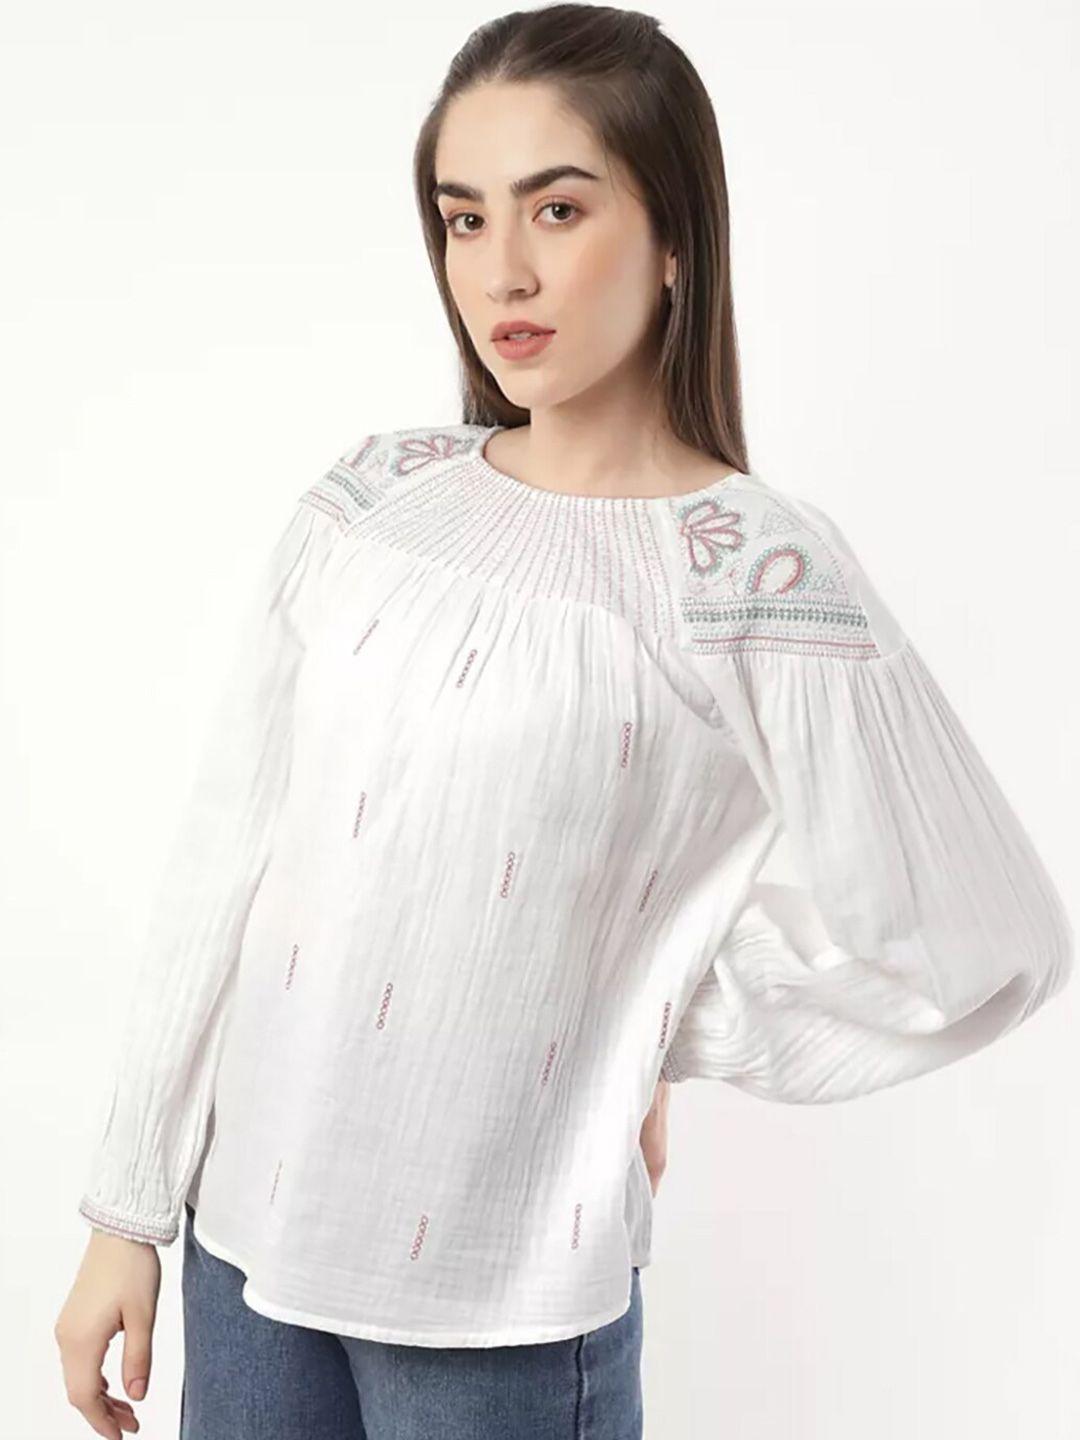 marks & spencer women soft white embroidered top